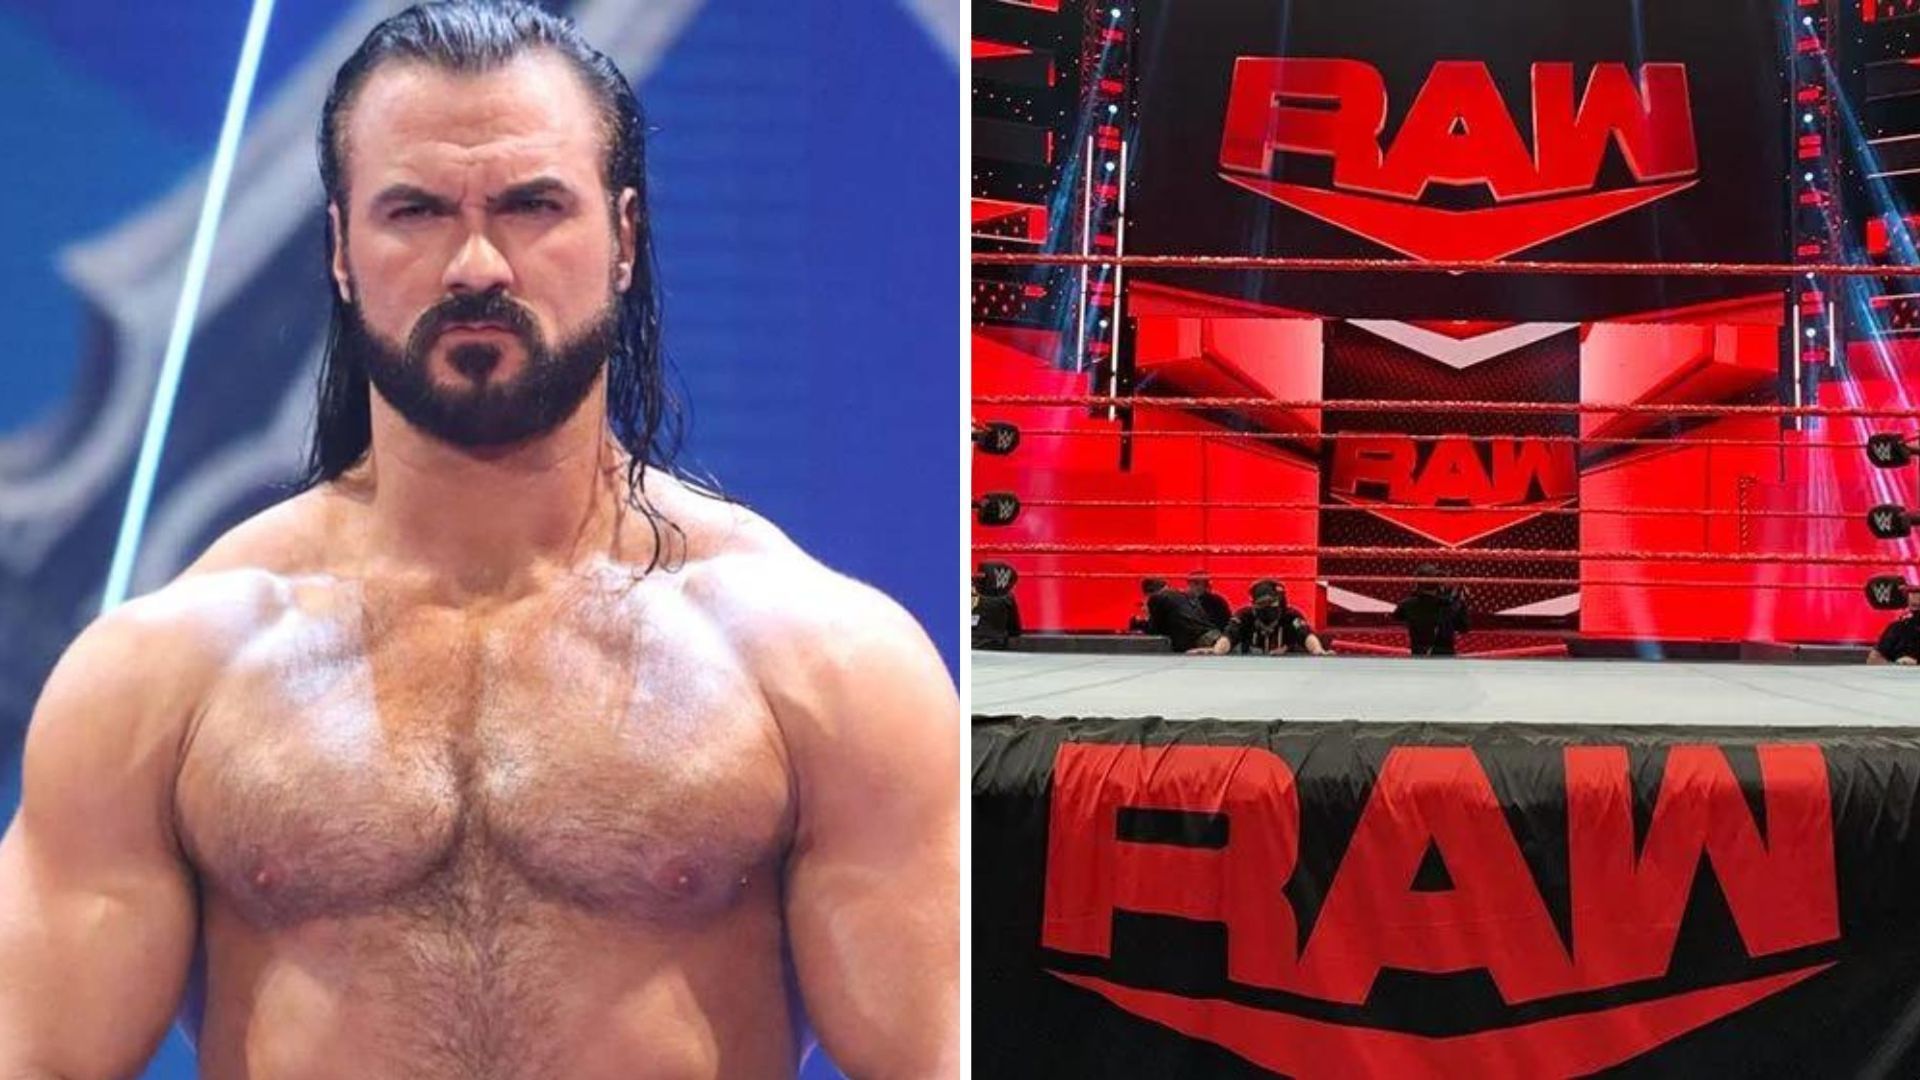 McIntyre is scheduled to appear tonight on RAW.